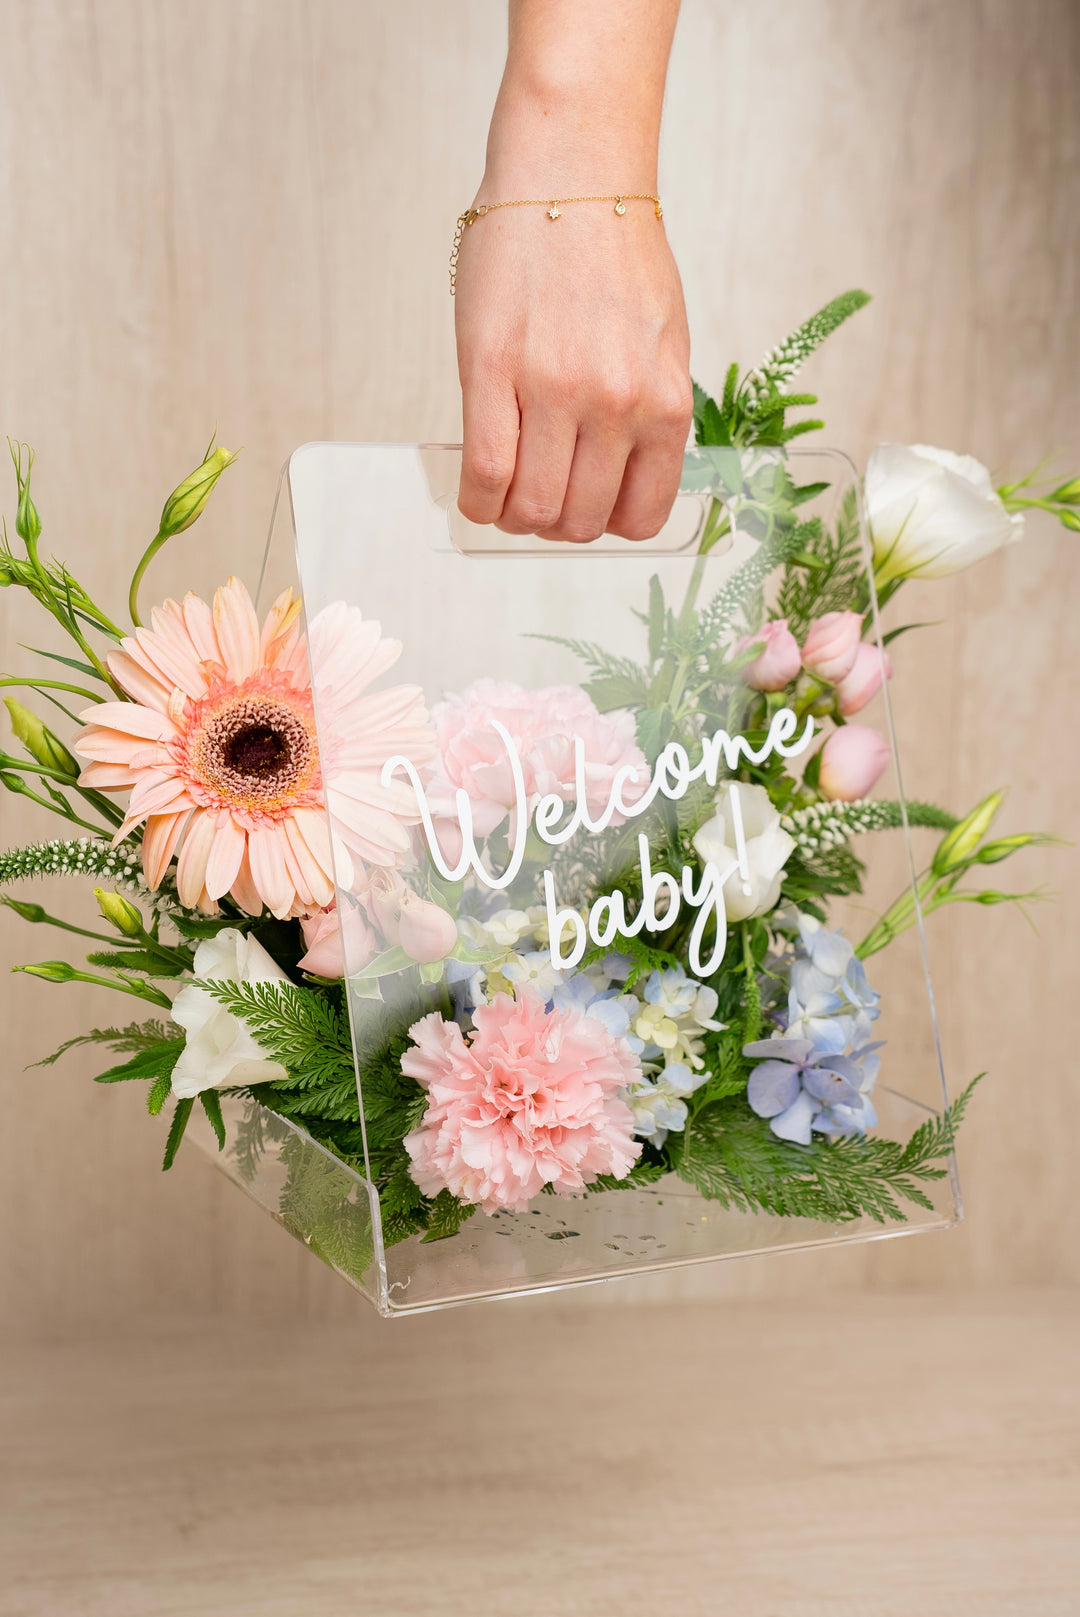 Message "Welcome Baby"